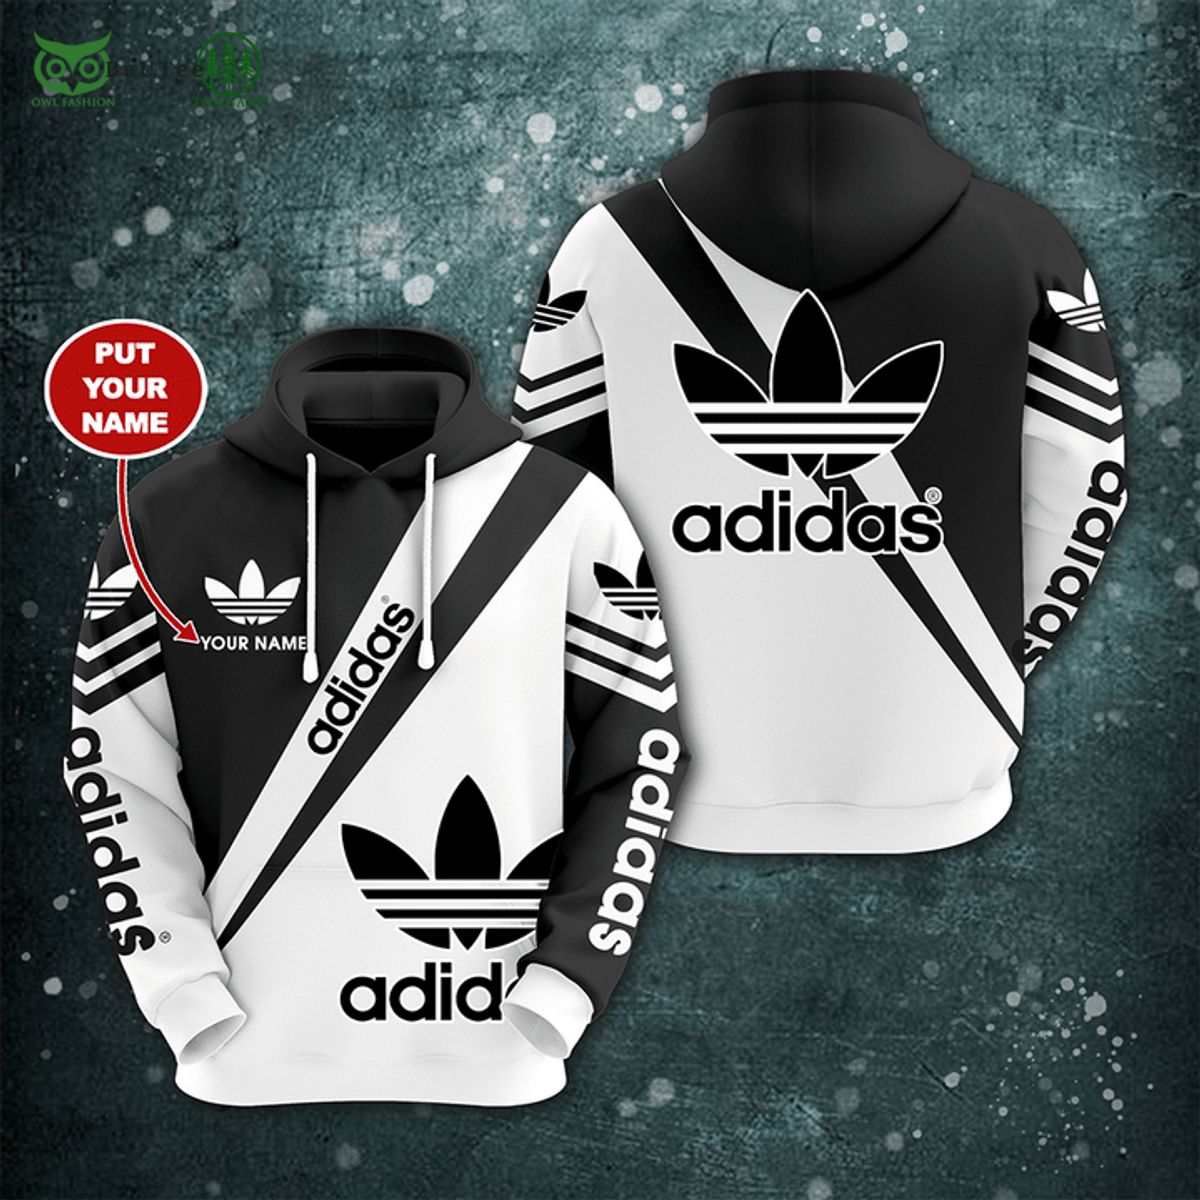 adidas famous sport brand black white personalized hoodie and pants 2 bUCsq